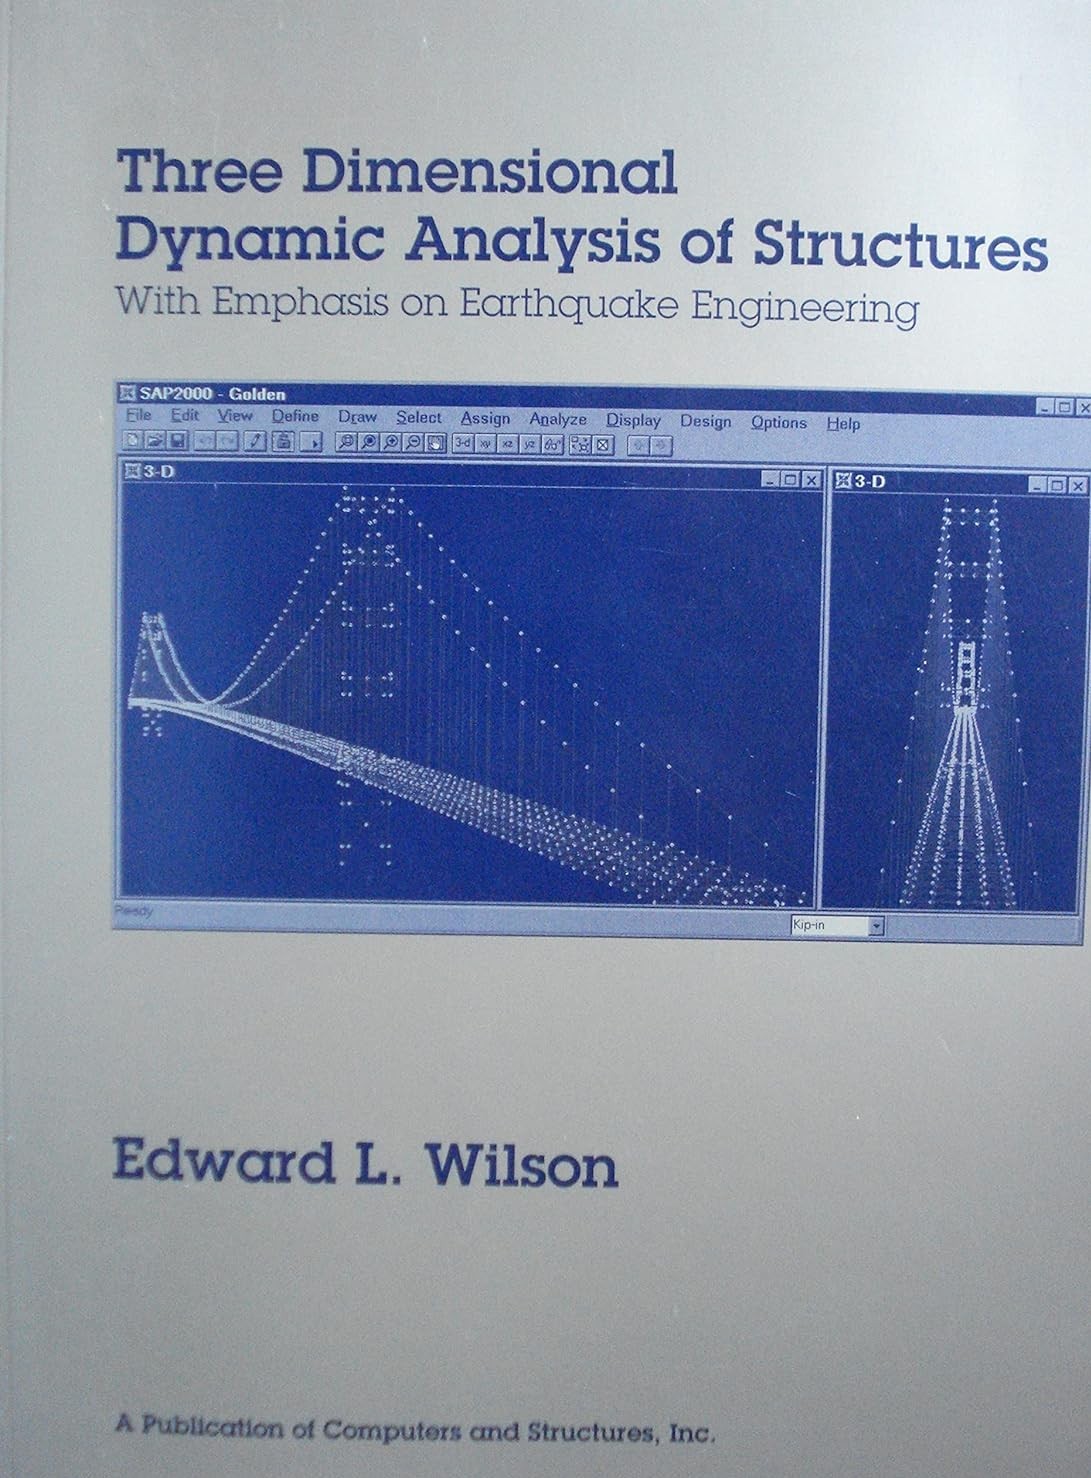 Three Dimensional Static and Dynamic Analysis of Structures: A Physical Approach With Emphasis on Earthquake Engineering